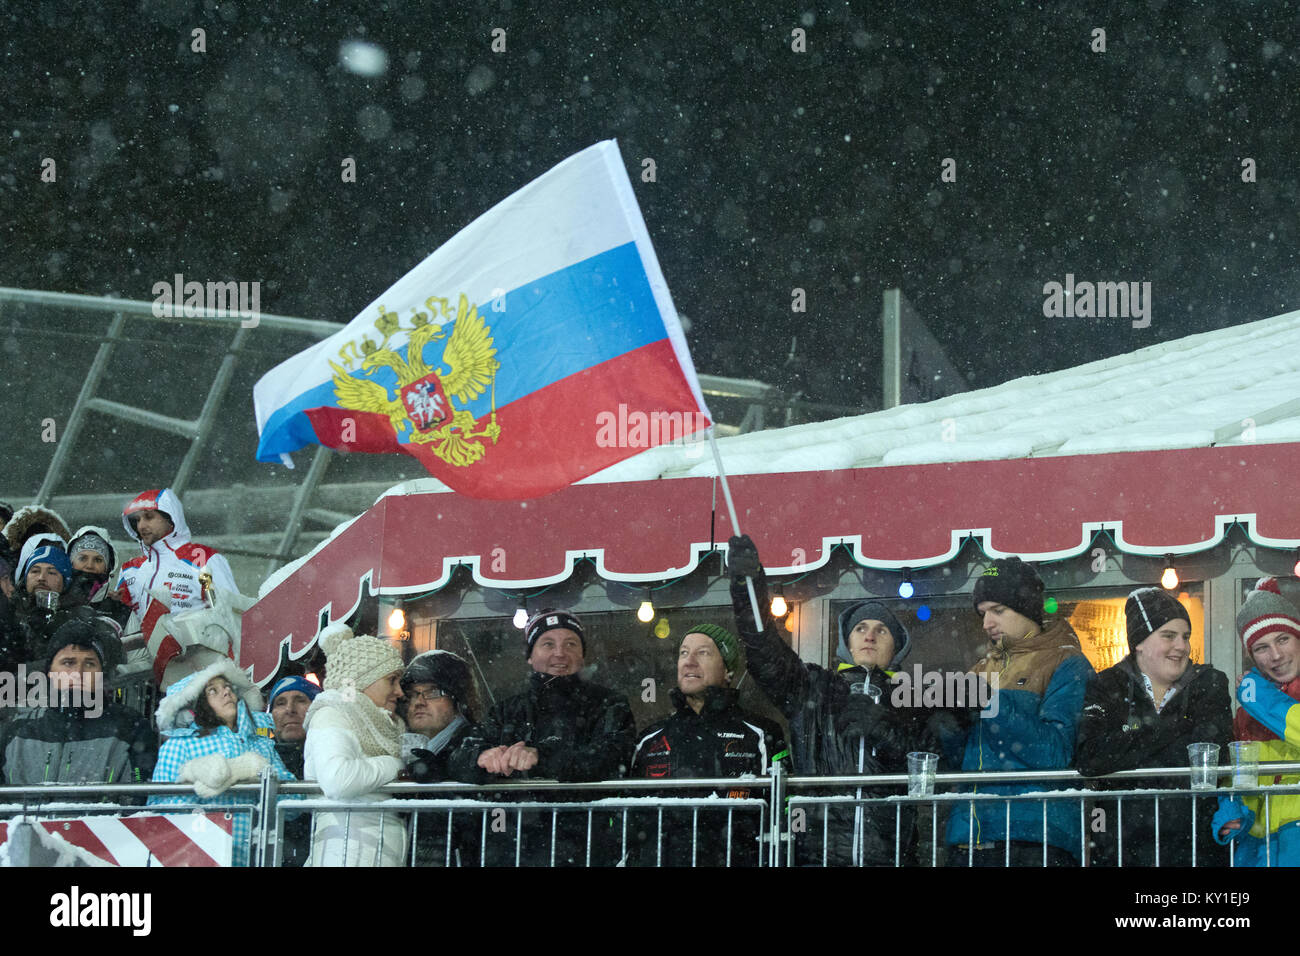 The Russian World Cup alpine ski racer Alexander Khoroshilov won his first World Cup win and went top of the podium to the joy and happiness of the Russian fans in Schladming, Austria. Photo credit: Christoph Oberschneider. Stock Photo